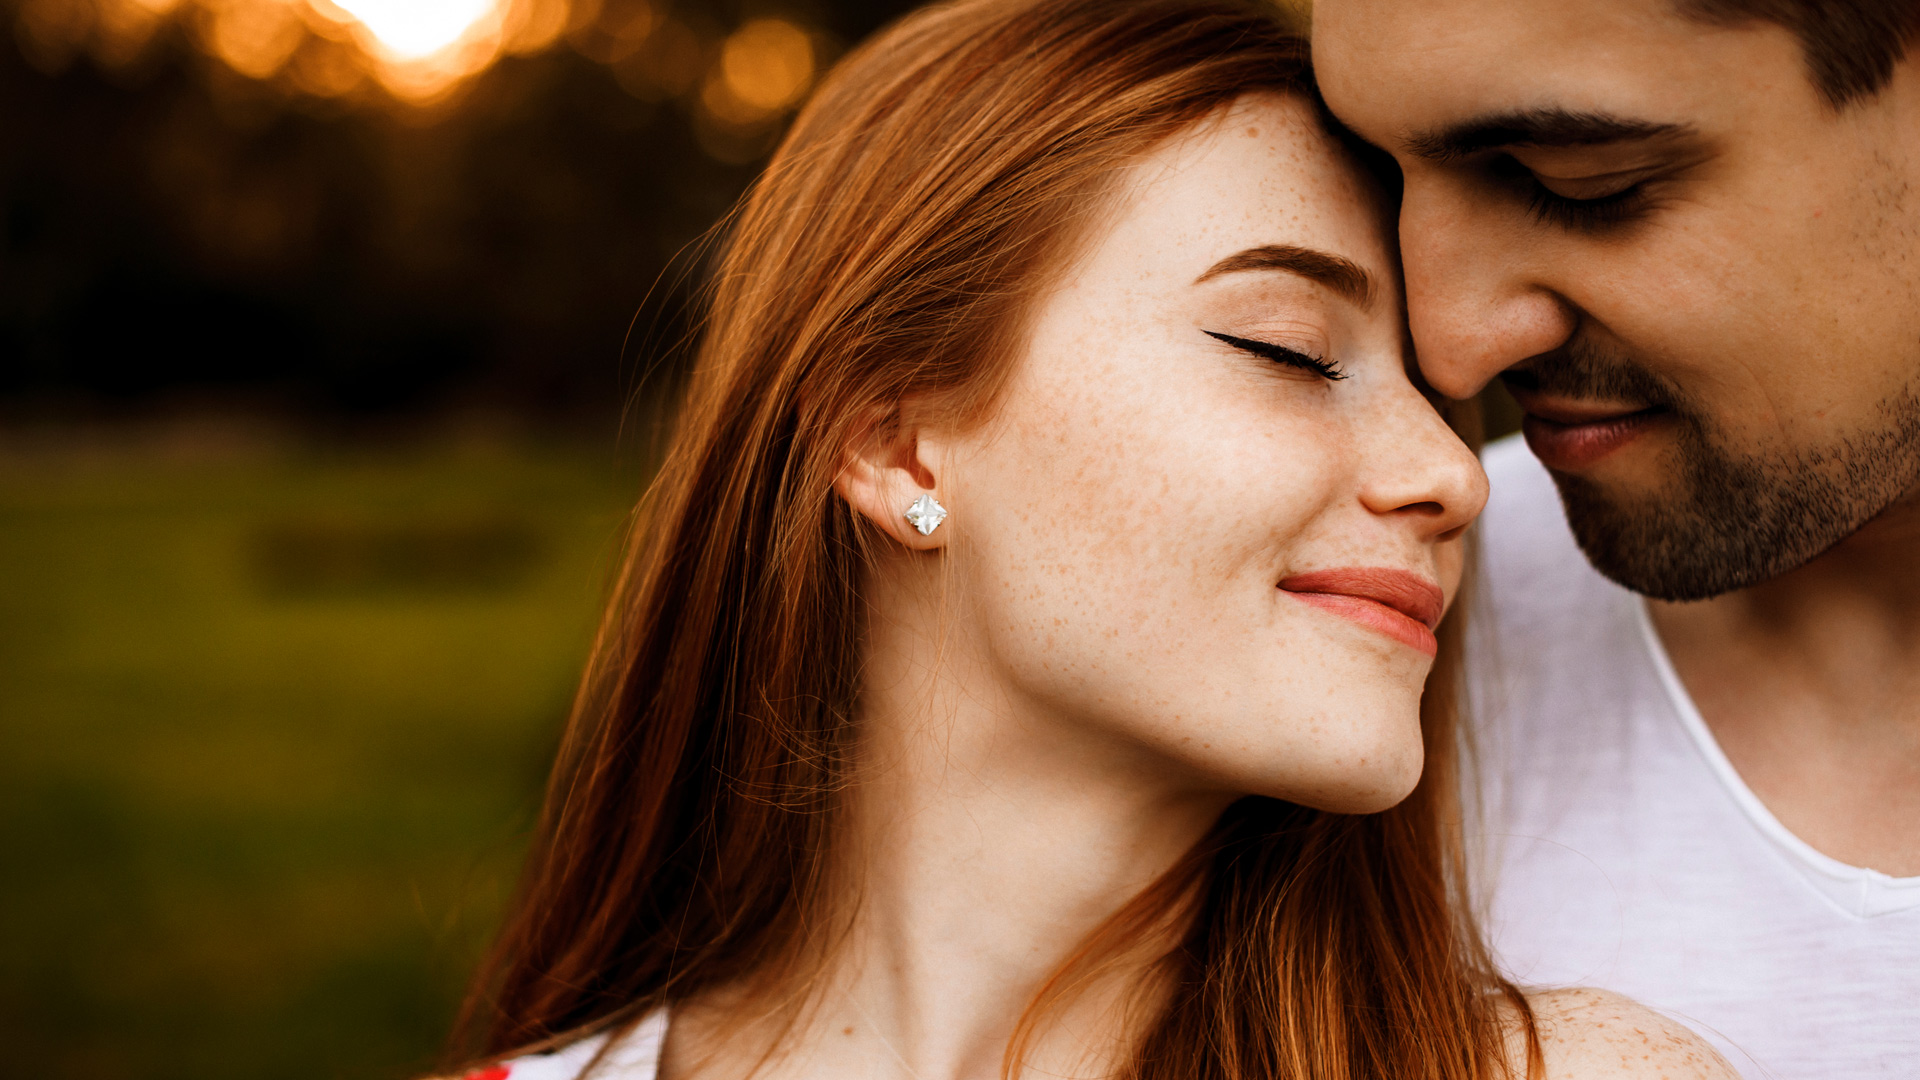 Red-haired woman and brunette man touching foreheads with each other with their eyes closed smiling.